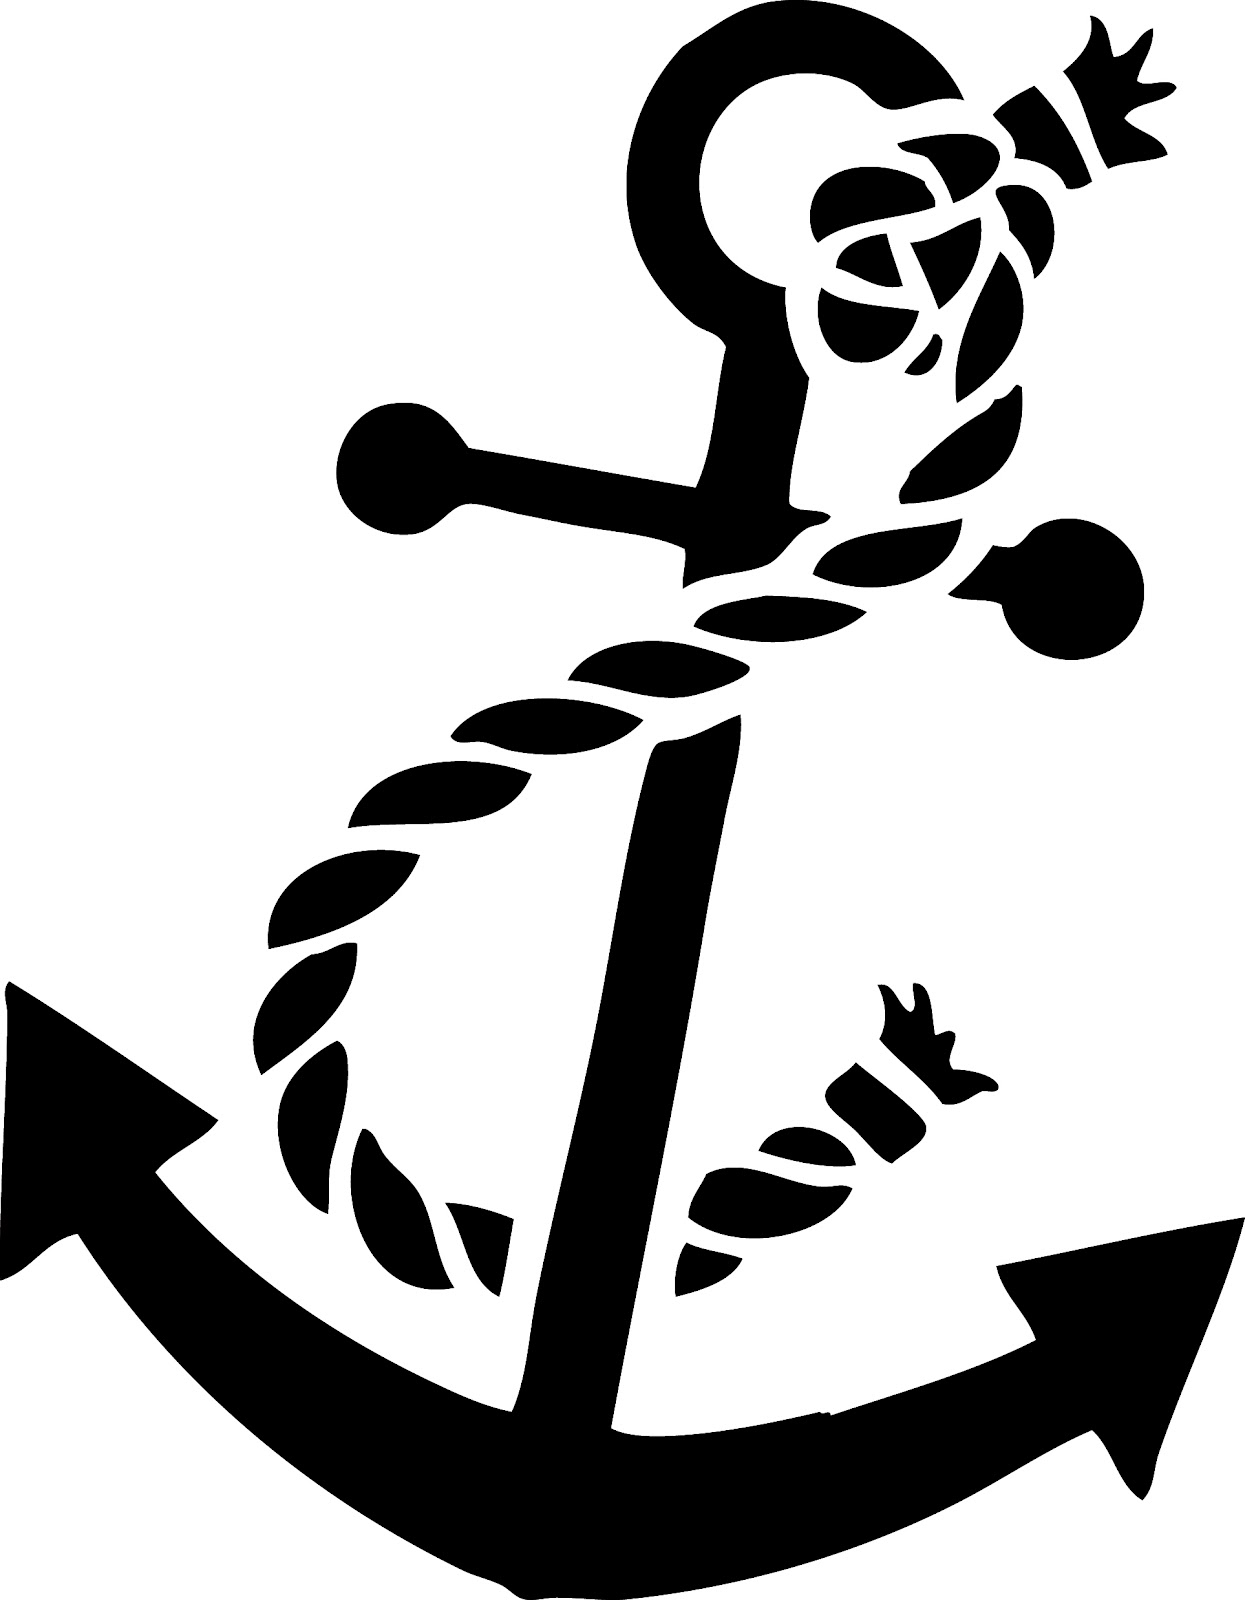 Free Cute Anchor Silhouette, Download Free Clip Art, Free